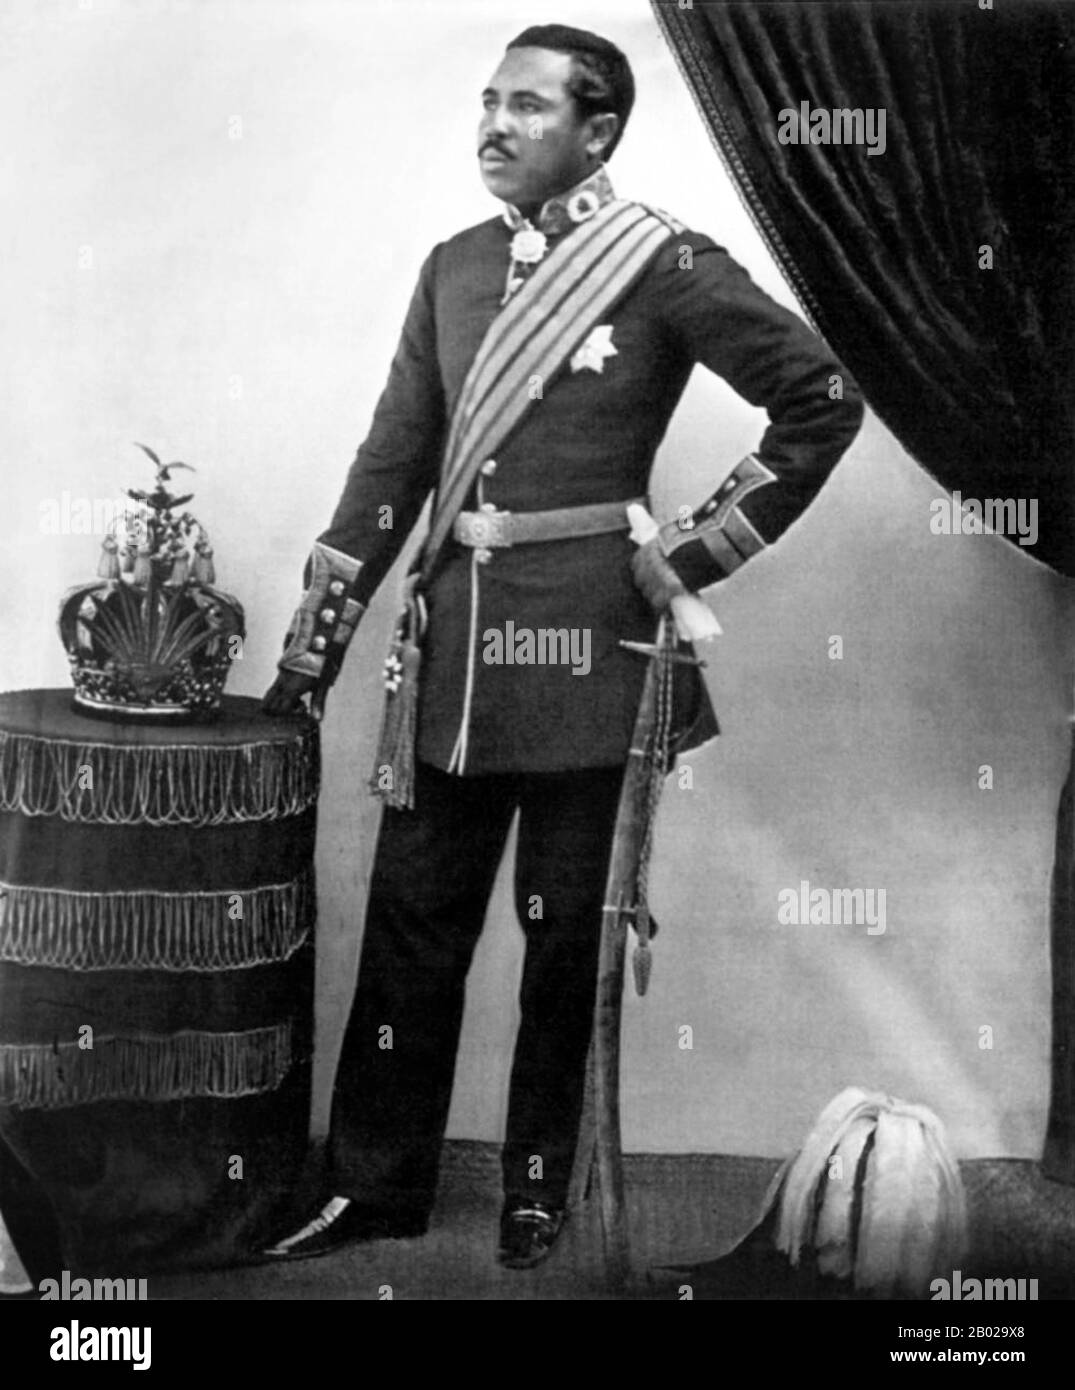 Radama II (September 23, 1829 – May 12, 1863 [assumed dead]) was the son and heir of Queen Ranavalona I and ruled from 1861 to 1863 over the Kingdom of Madagascar, which controlled virtually the entire island.  Radama's rule, although brief, was a pivotal period in the history of the Kingdom of Madagascar. Under the unyielding and often harsh 33-year rule of his mother, Queen Ranavalona I, Madagascar had successfully preserved its cultural and political independence from French and British designs. Rejecting the queen's policy of isolationism and Christian persecution, Radama II permitted reli Stock Photo